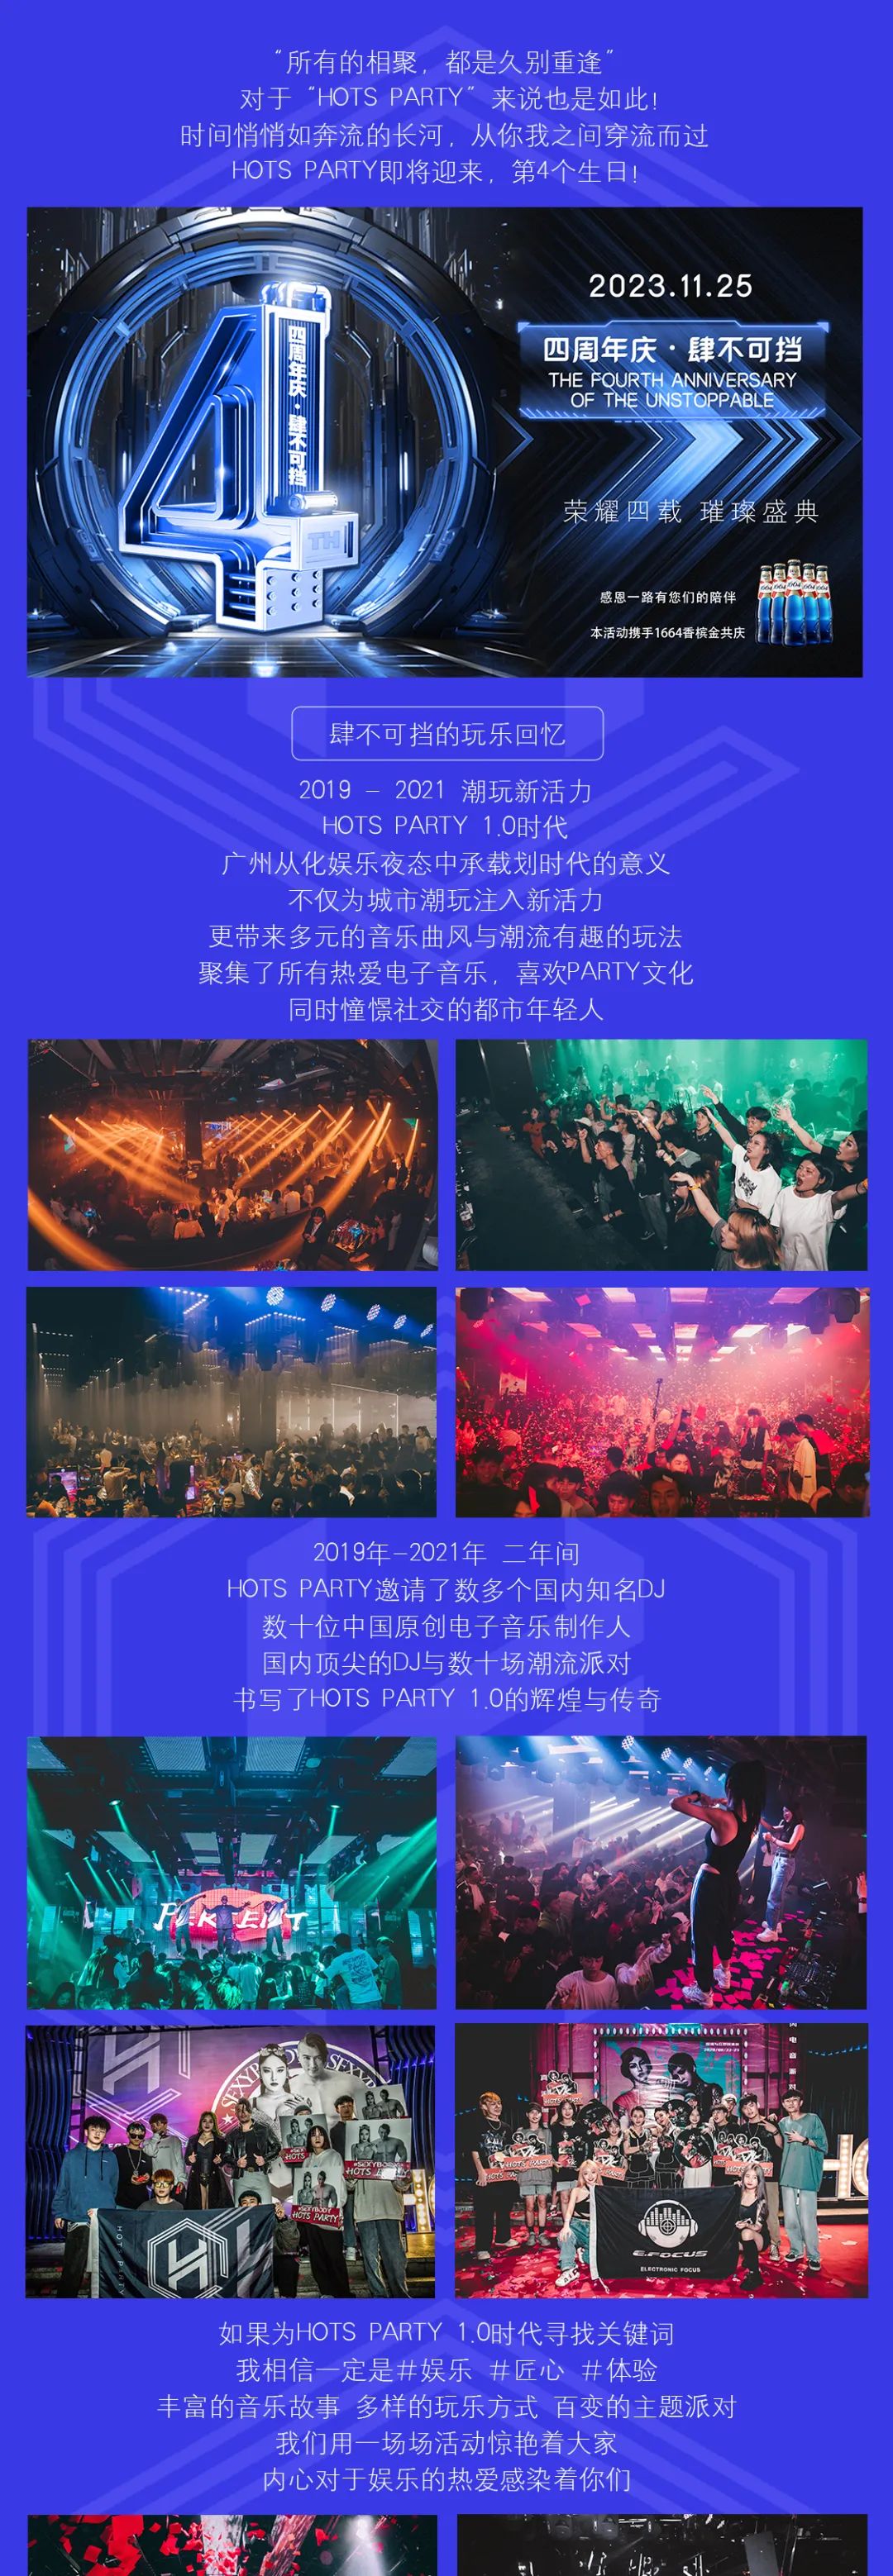 HOTS PARTY 四周年庆·肆不可挡-广州HOTS酒吧/HOTS PARTY